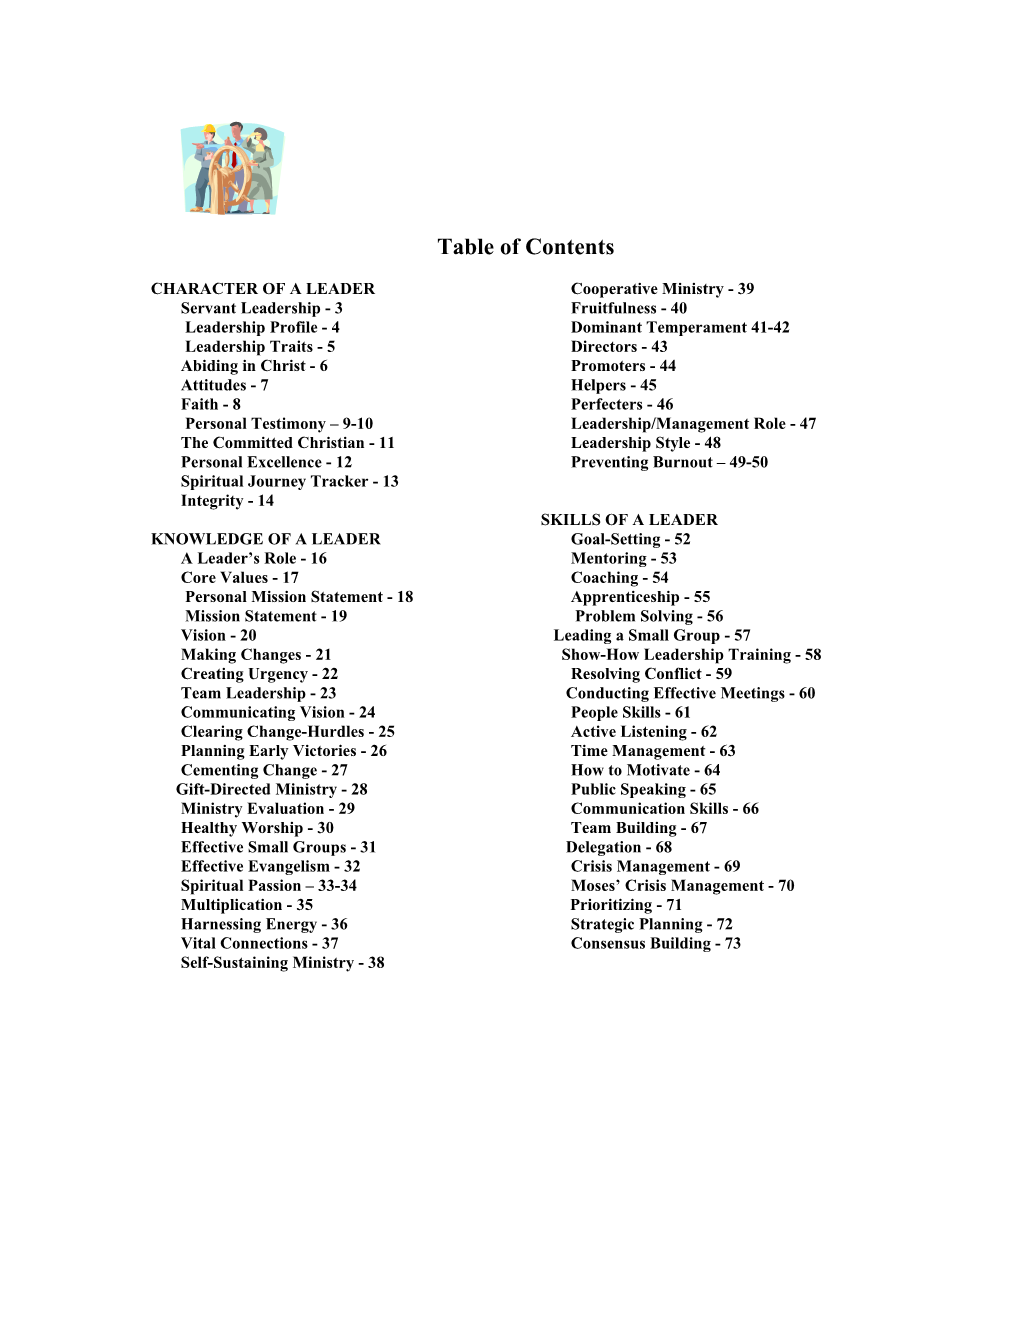 Table of Contents s422